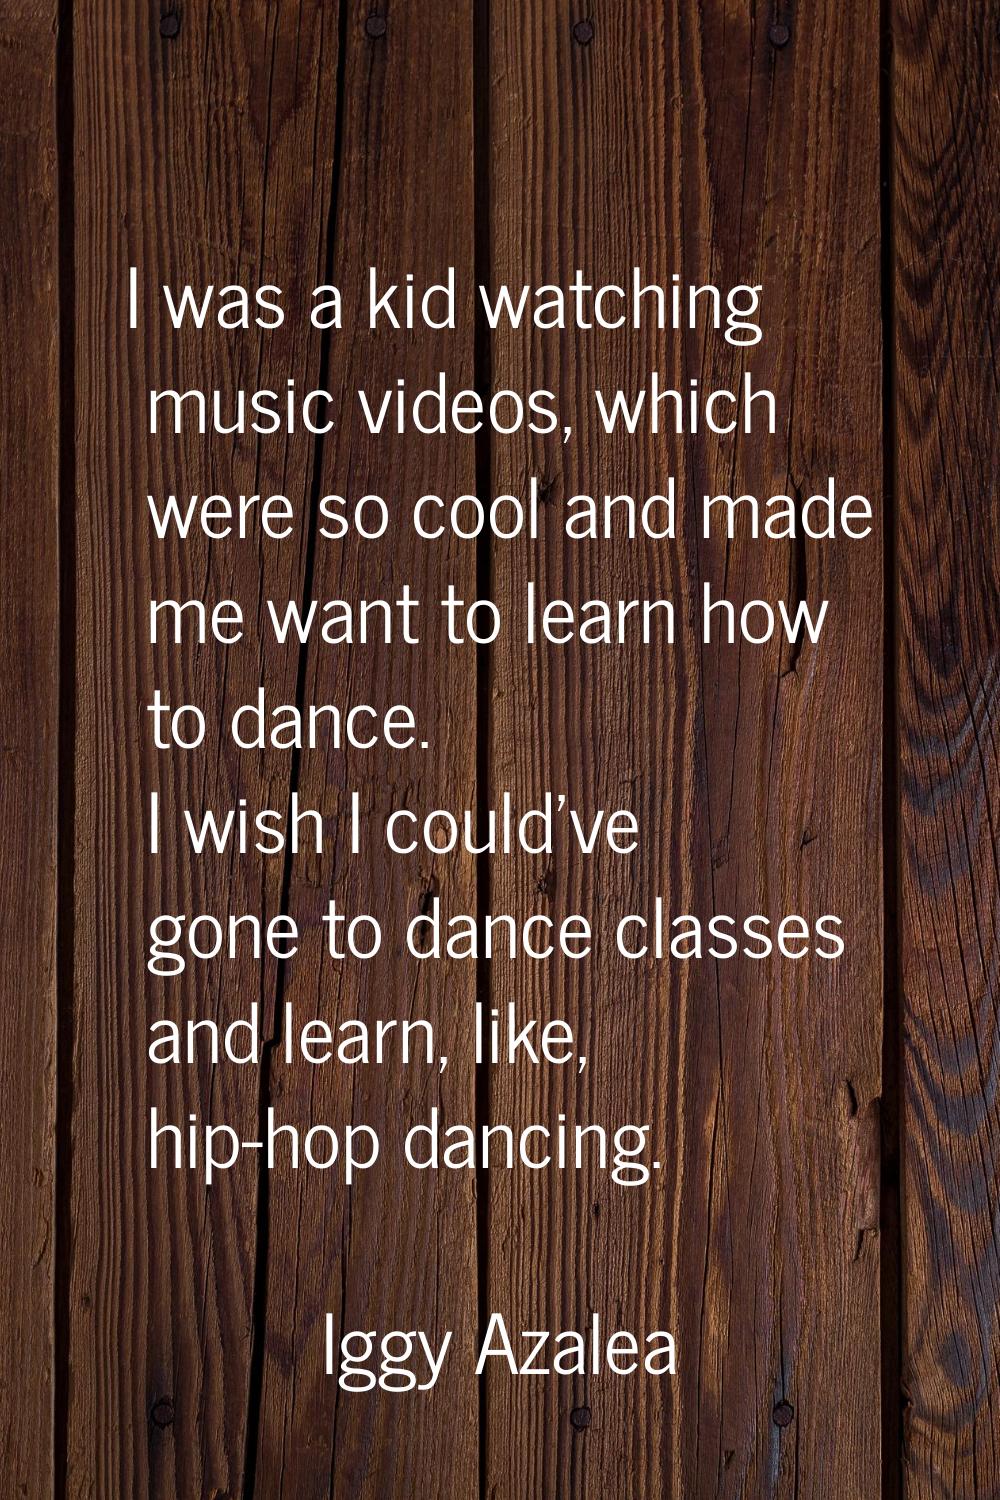 I was a kid watching music videos, which were so cool and made me want to learn how to dance. I wis